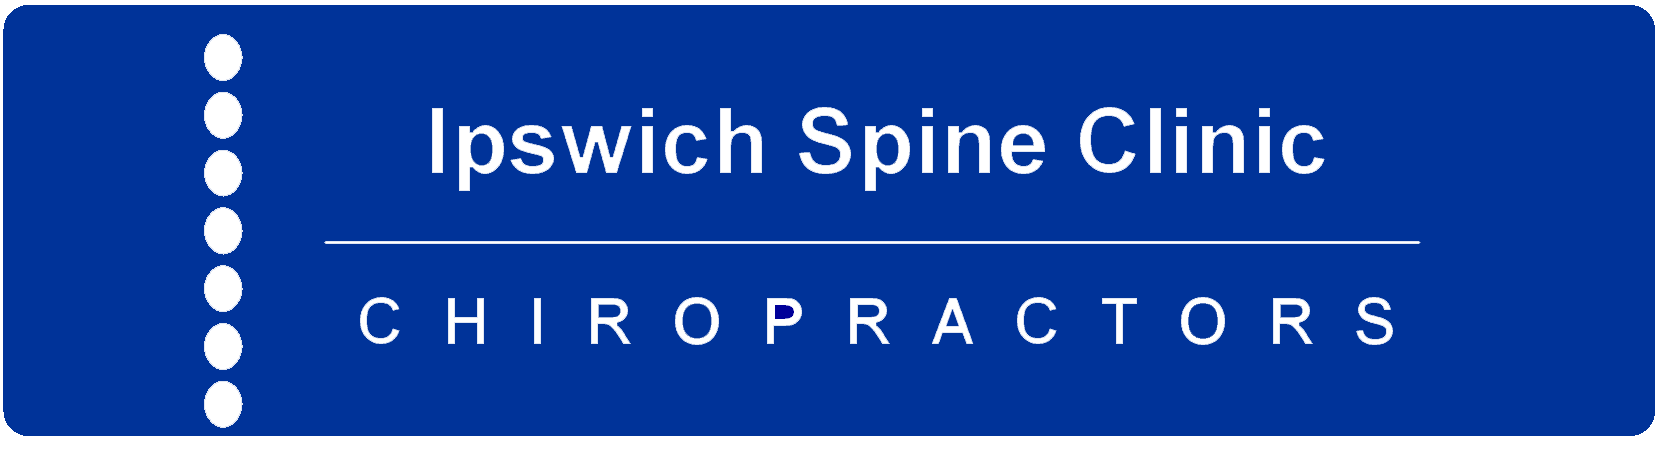 Ipswich Spine Clinic Receives Rave Reviews for its Transformative Chiropractic Care